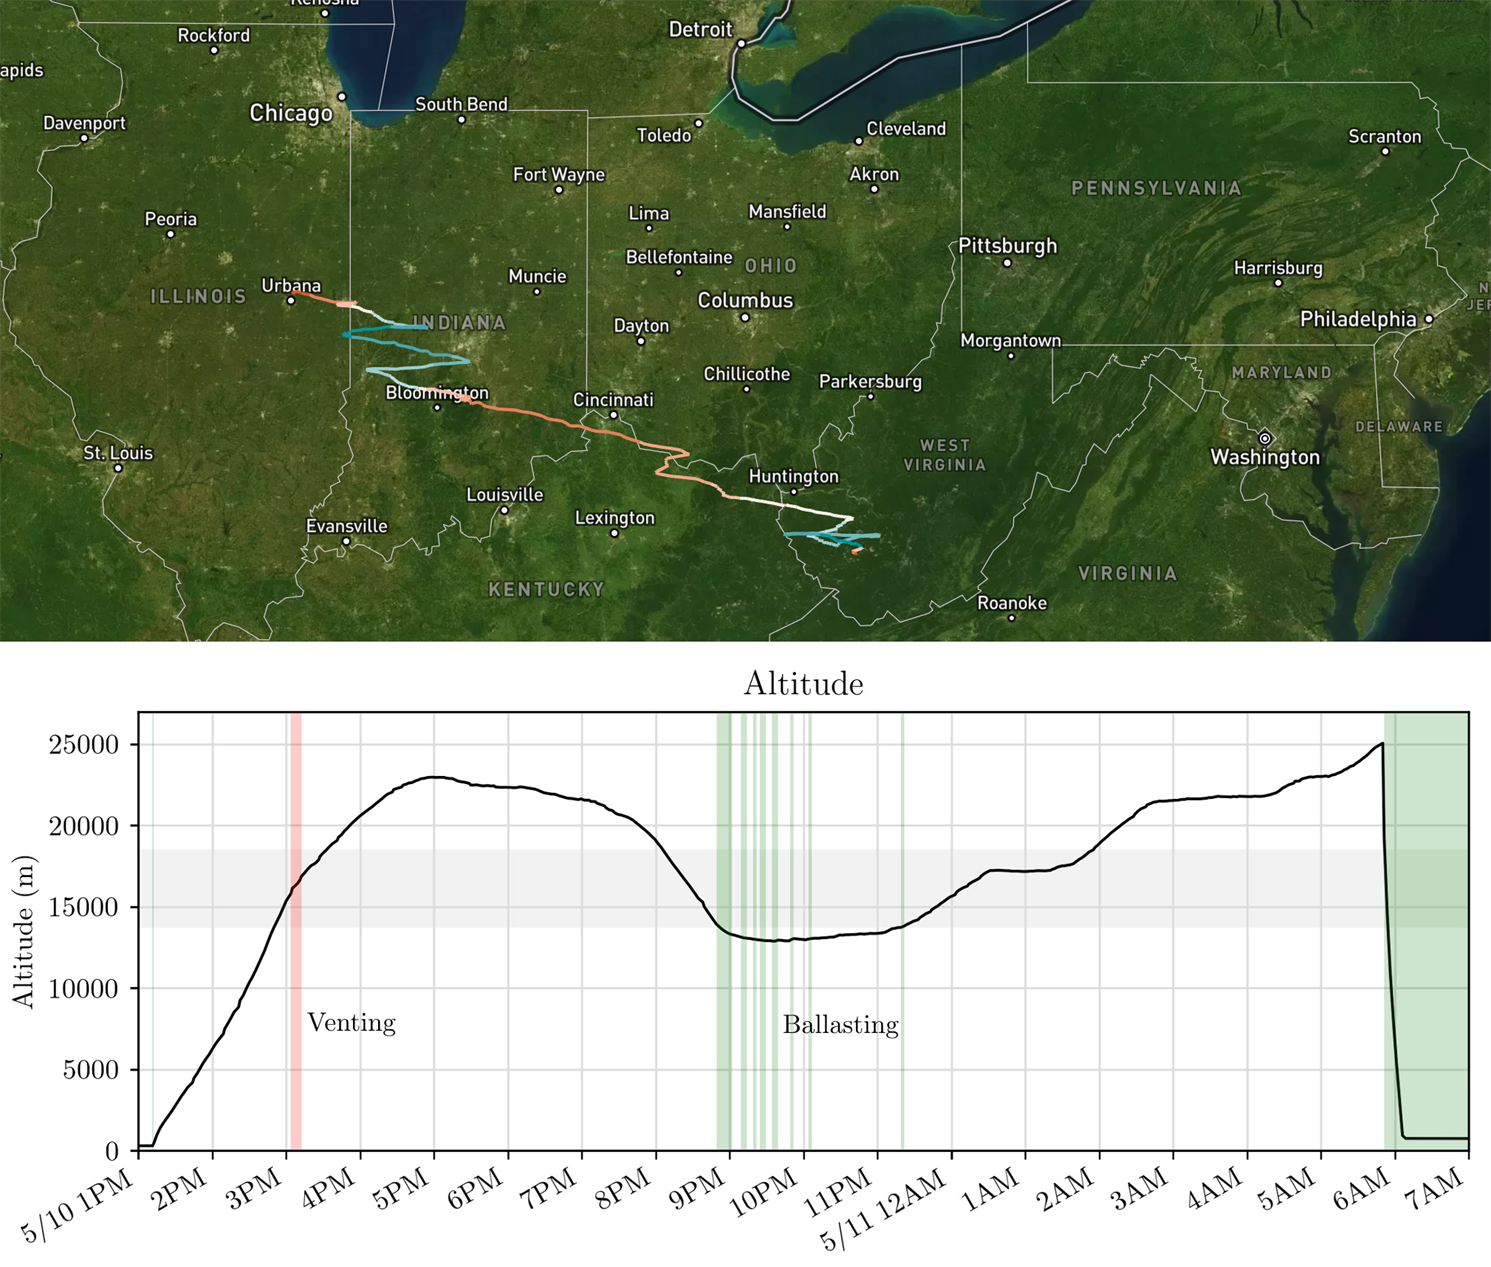 The inaugural flight of the Illini Voyager. Top image shows the route, graph shows altitude over time.